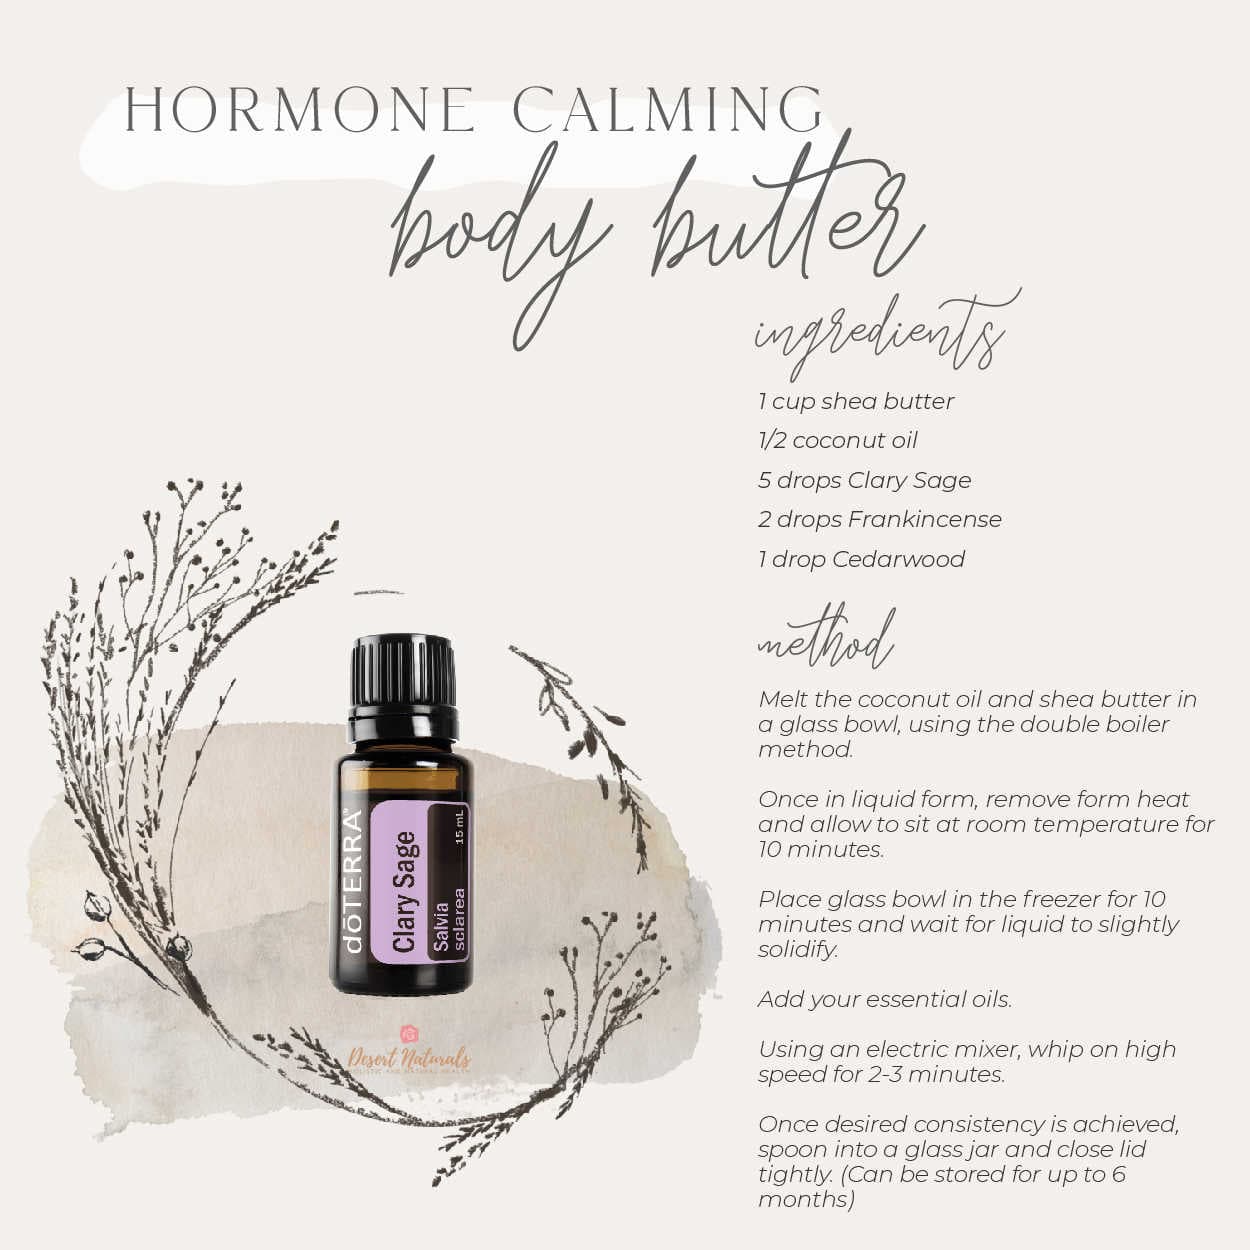 DIY Recipe for Hormone Balancing Body Butter Featuring Clary Sage essential oil